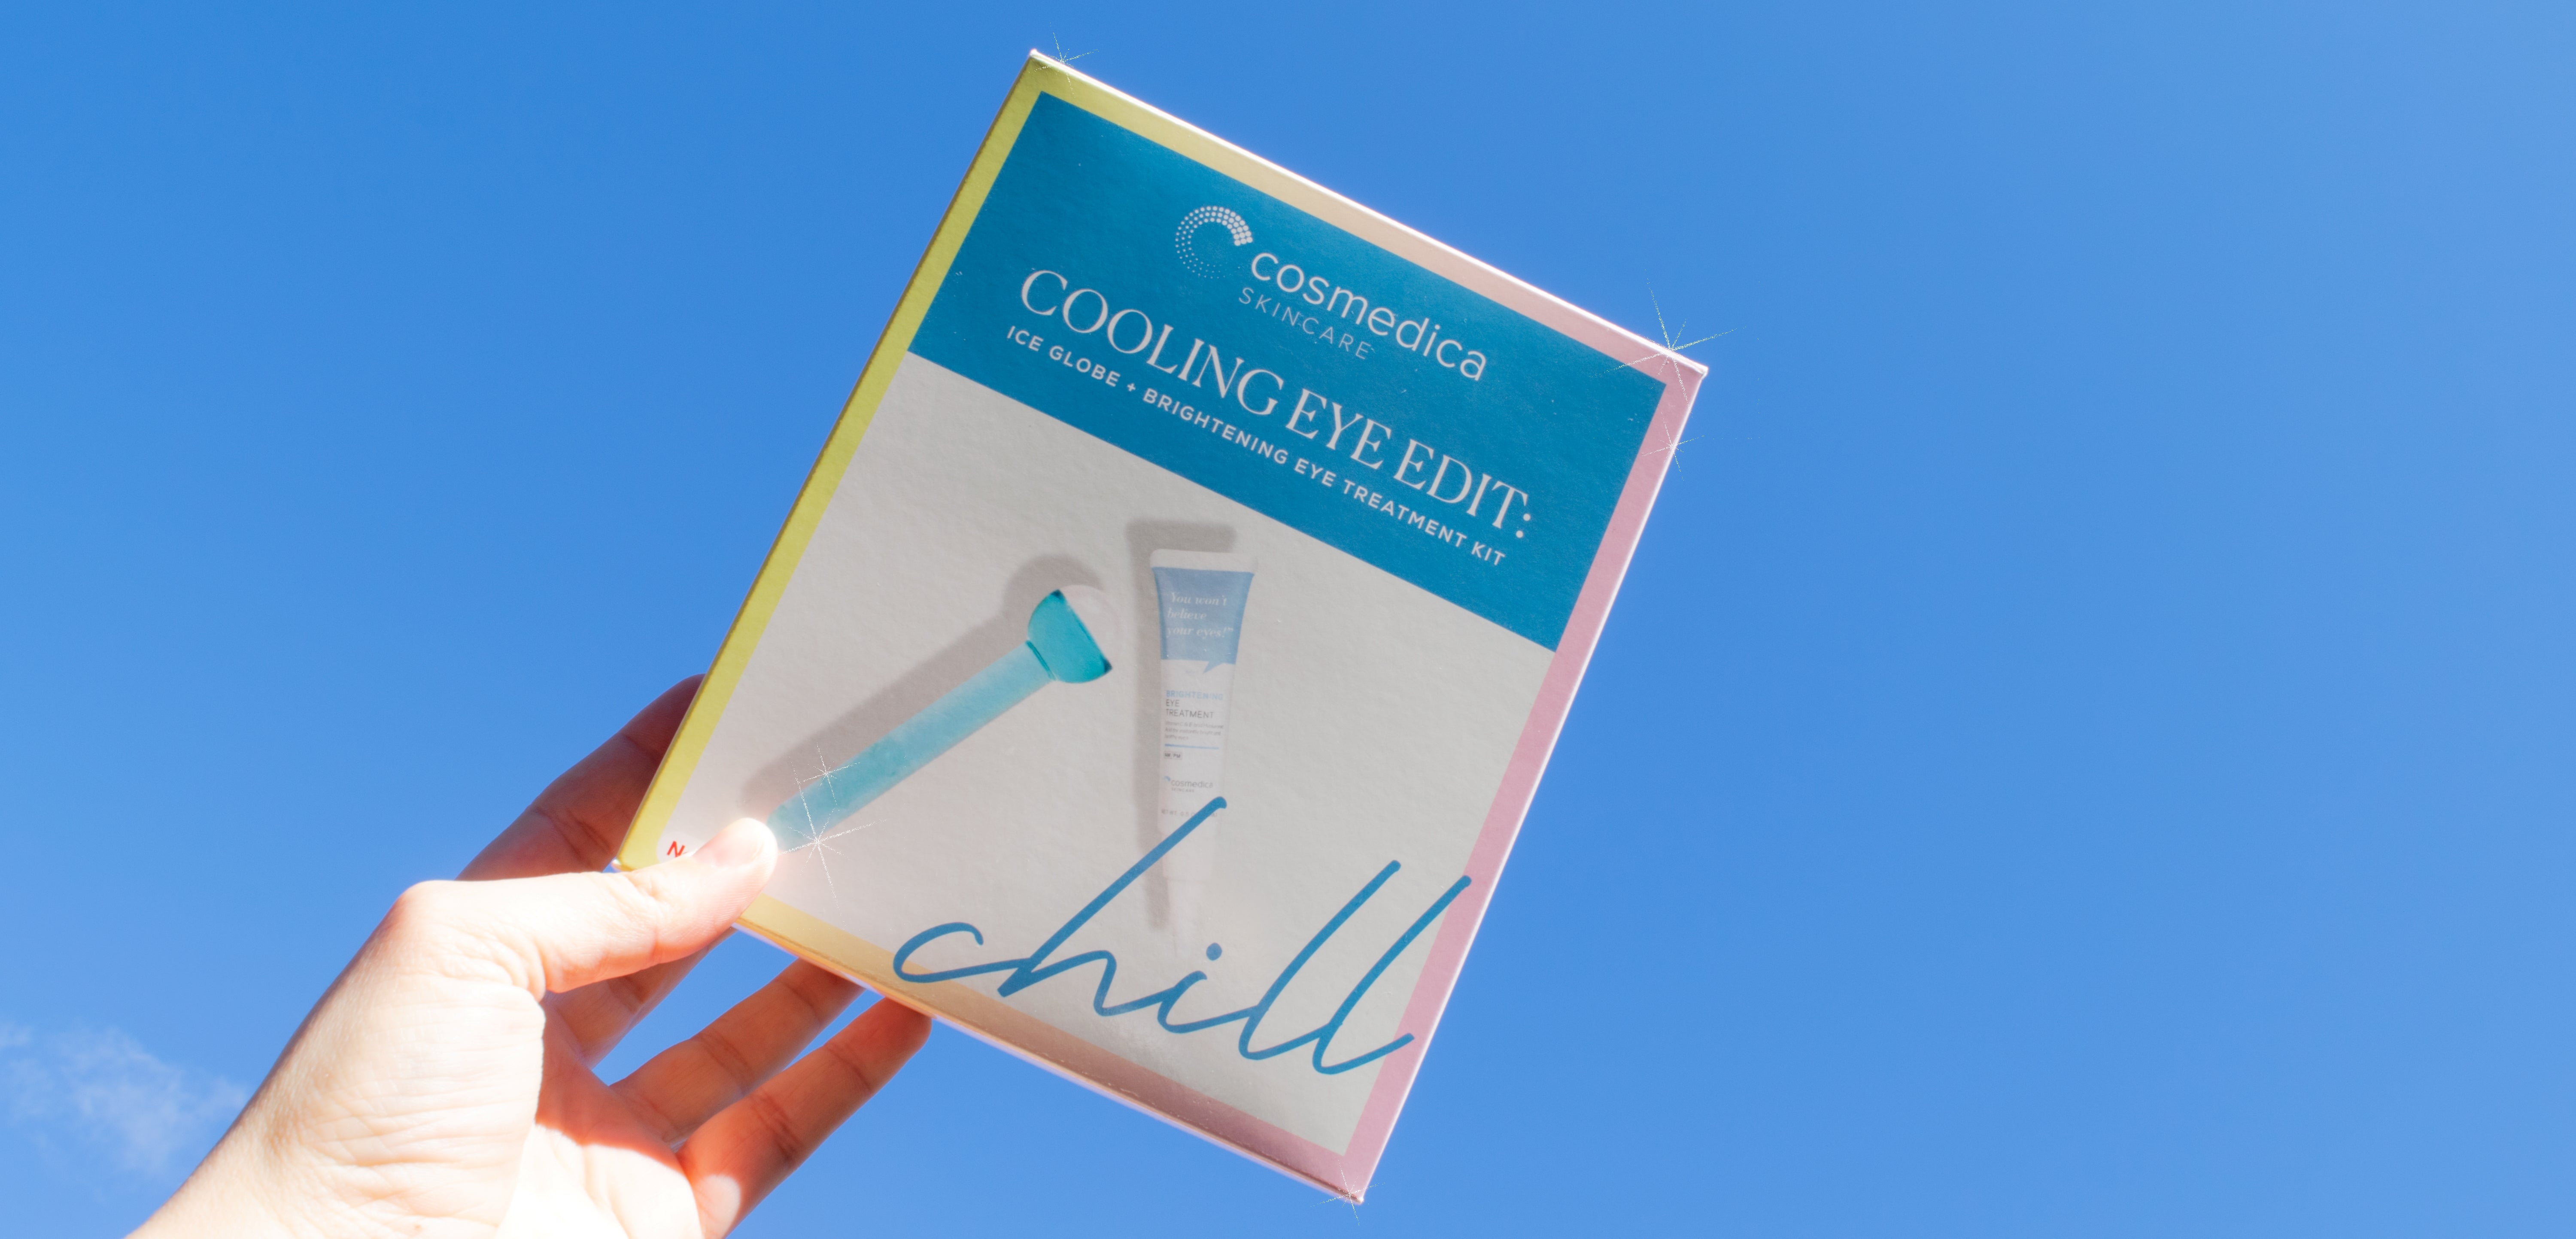 Announcing Our Cooling Eye Edit Kit for Target